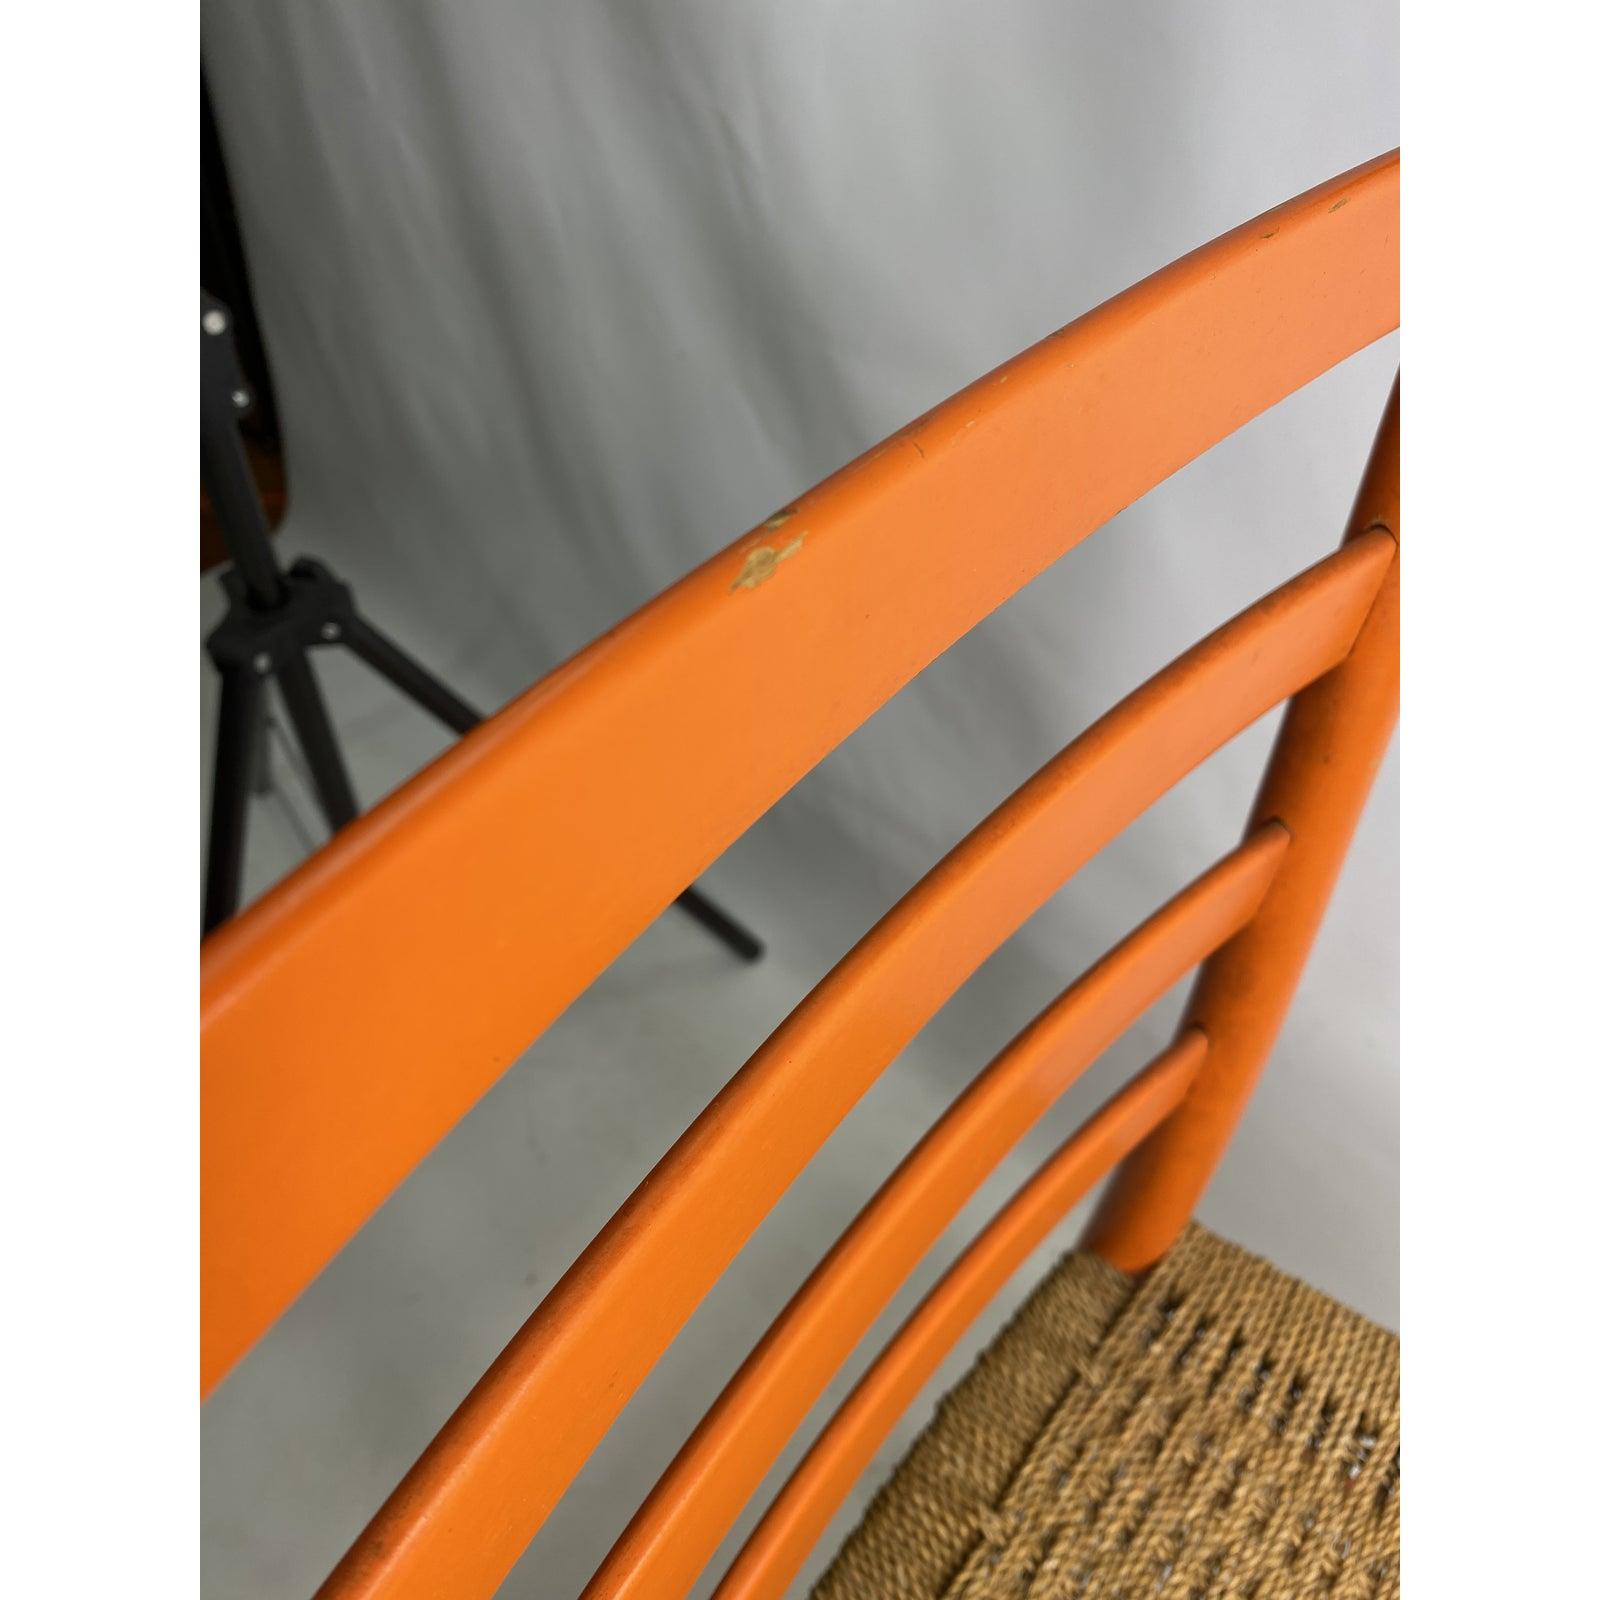 Vintage Gio Ponti Style Orange Chair, Made in Italy In Good Condition For Sale In Esperance, NY